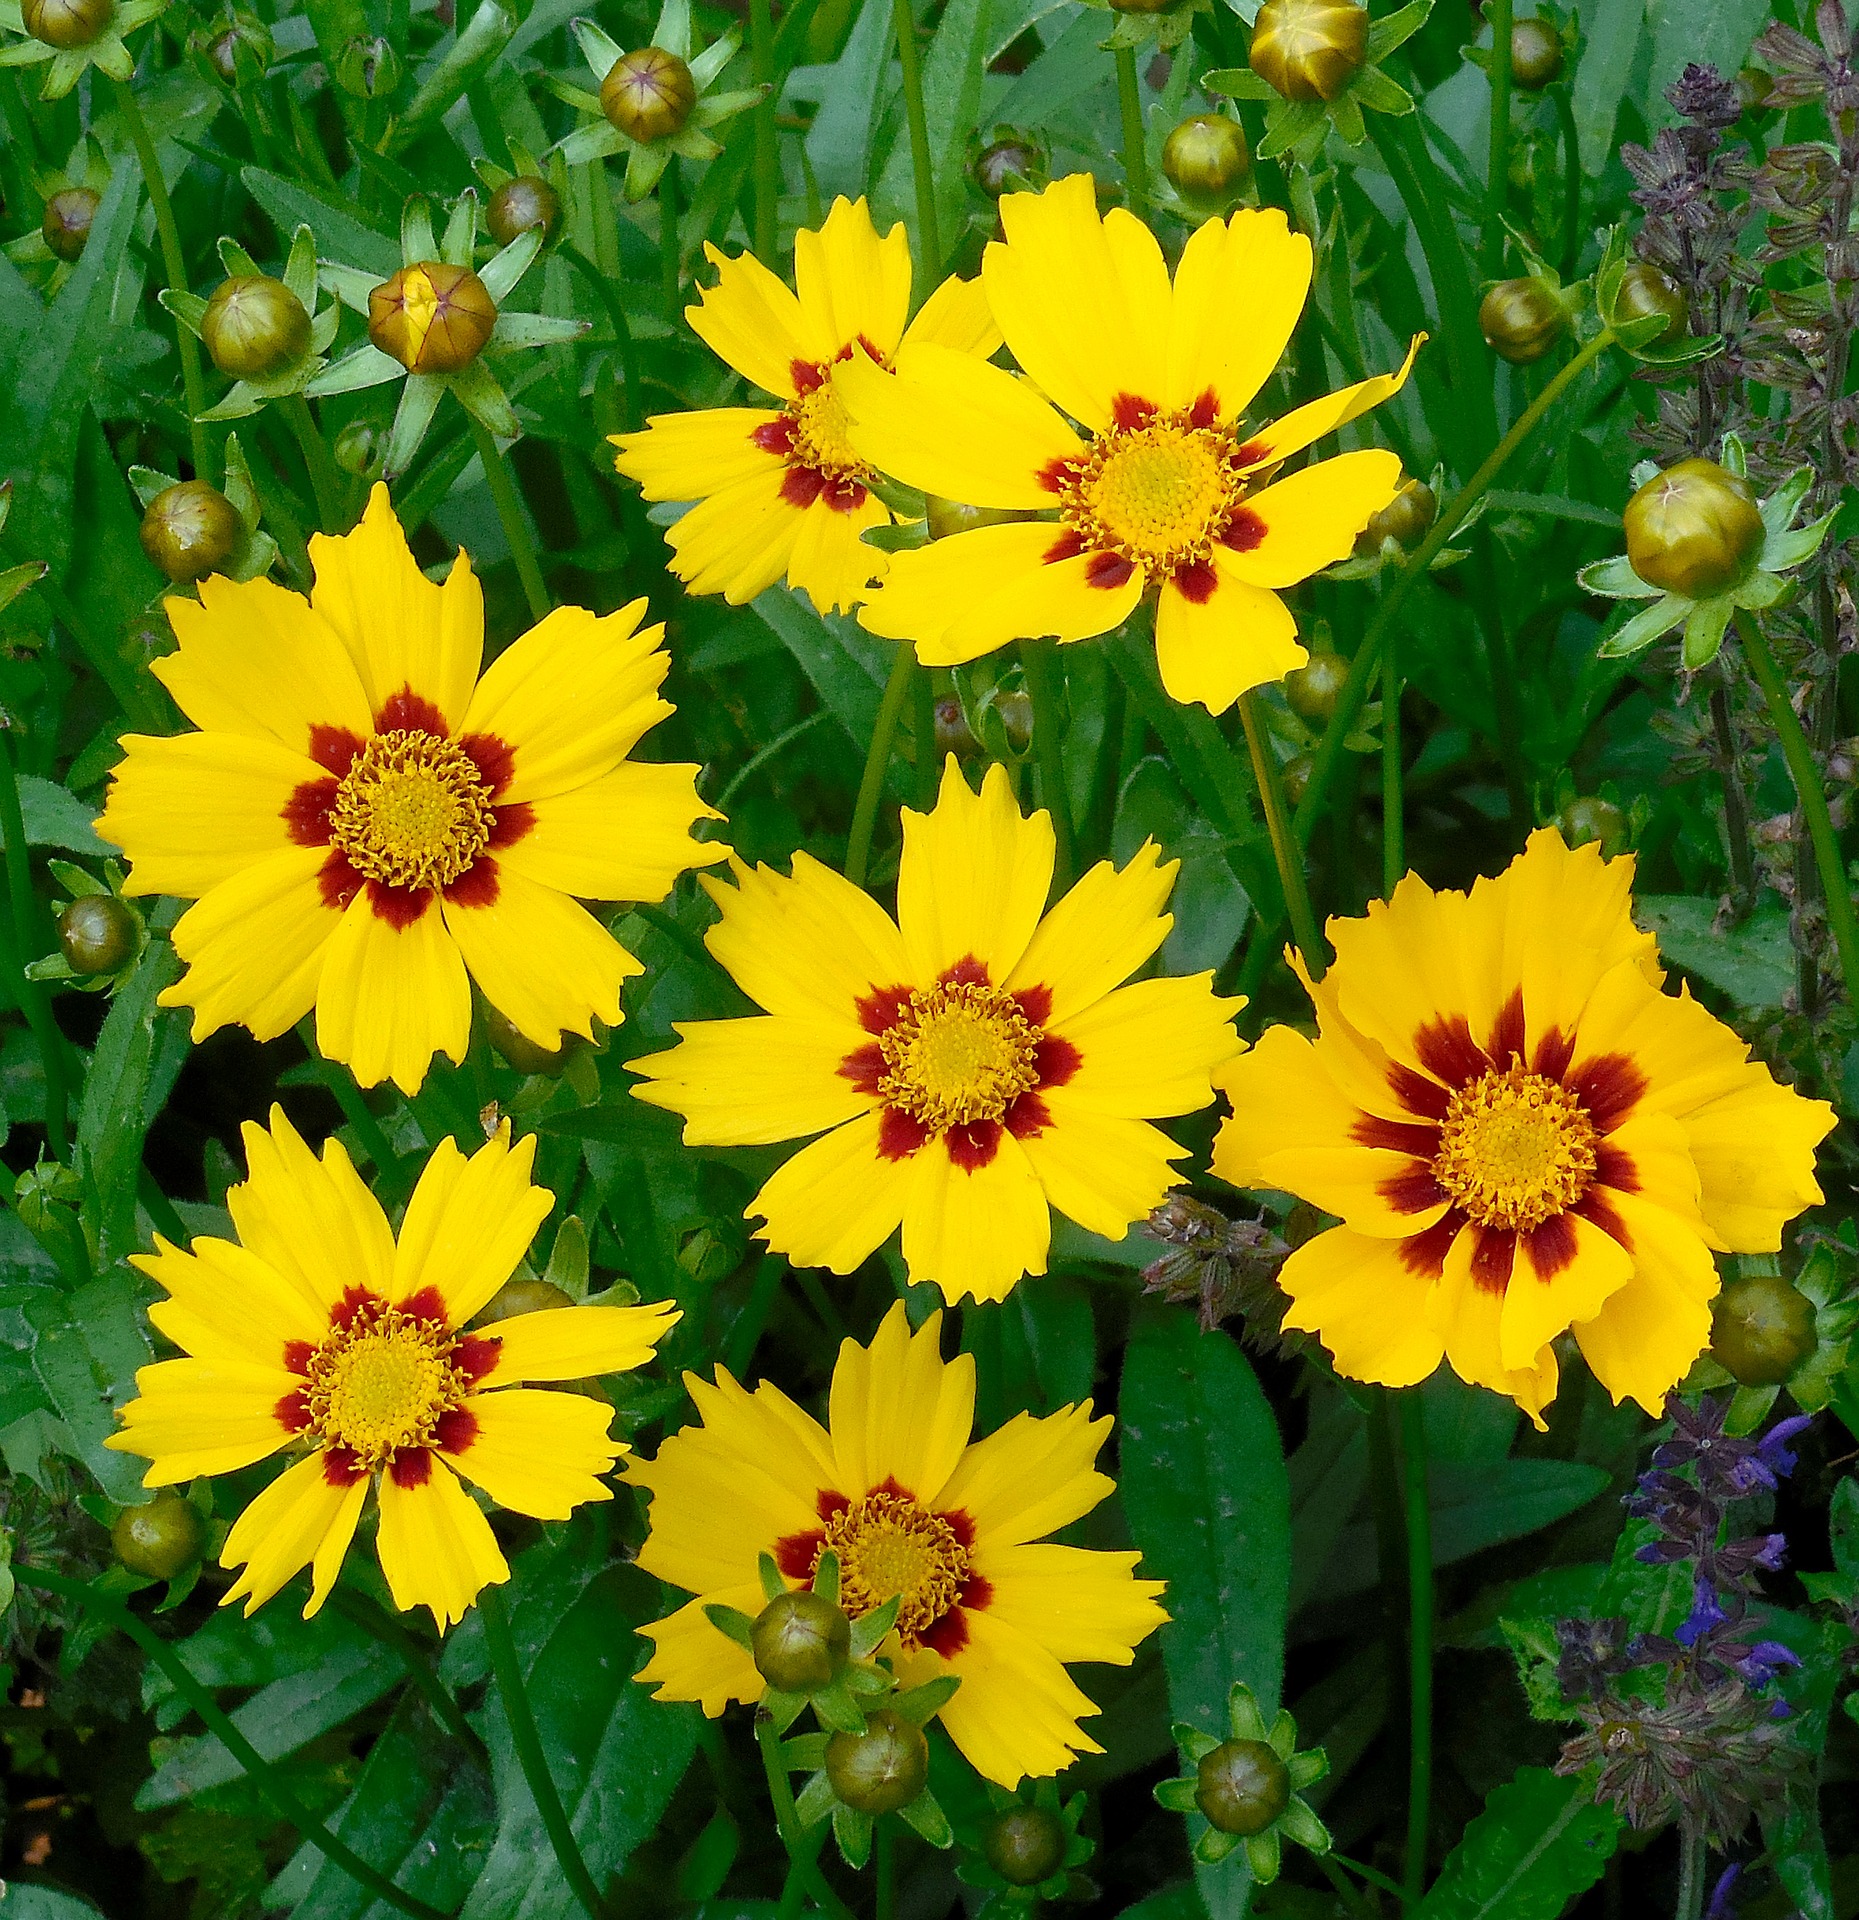 coreopsis - what do goldfinches eat